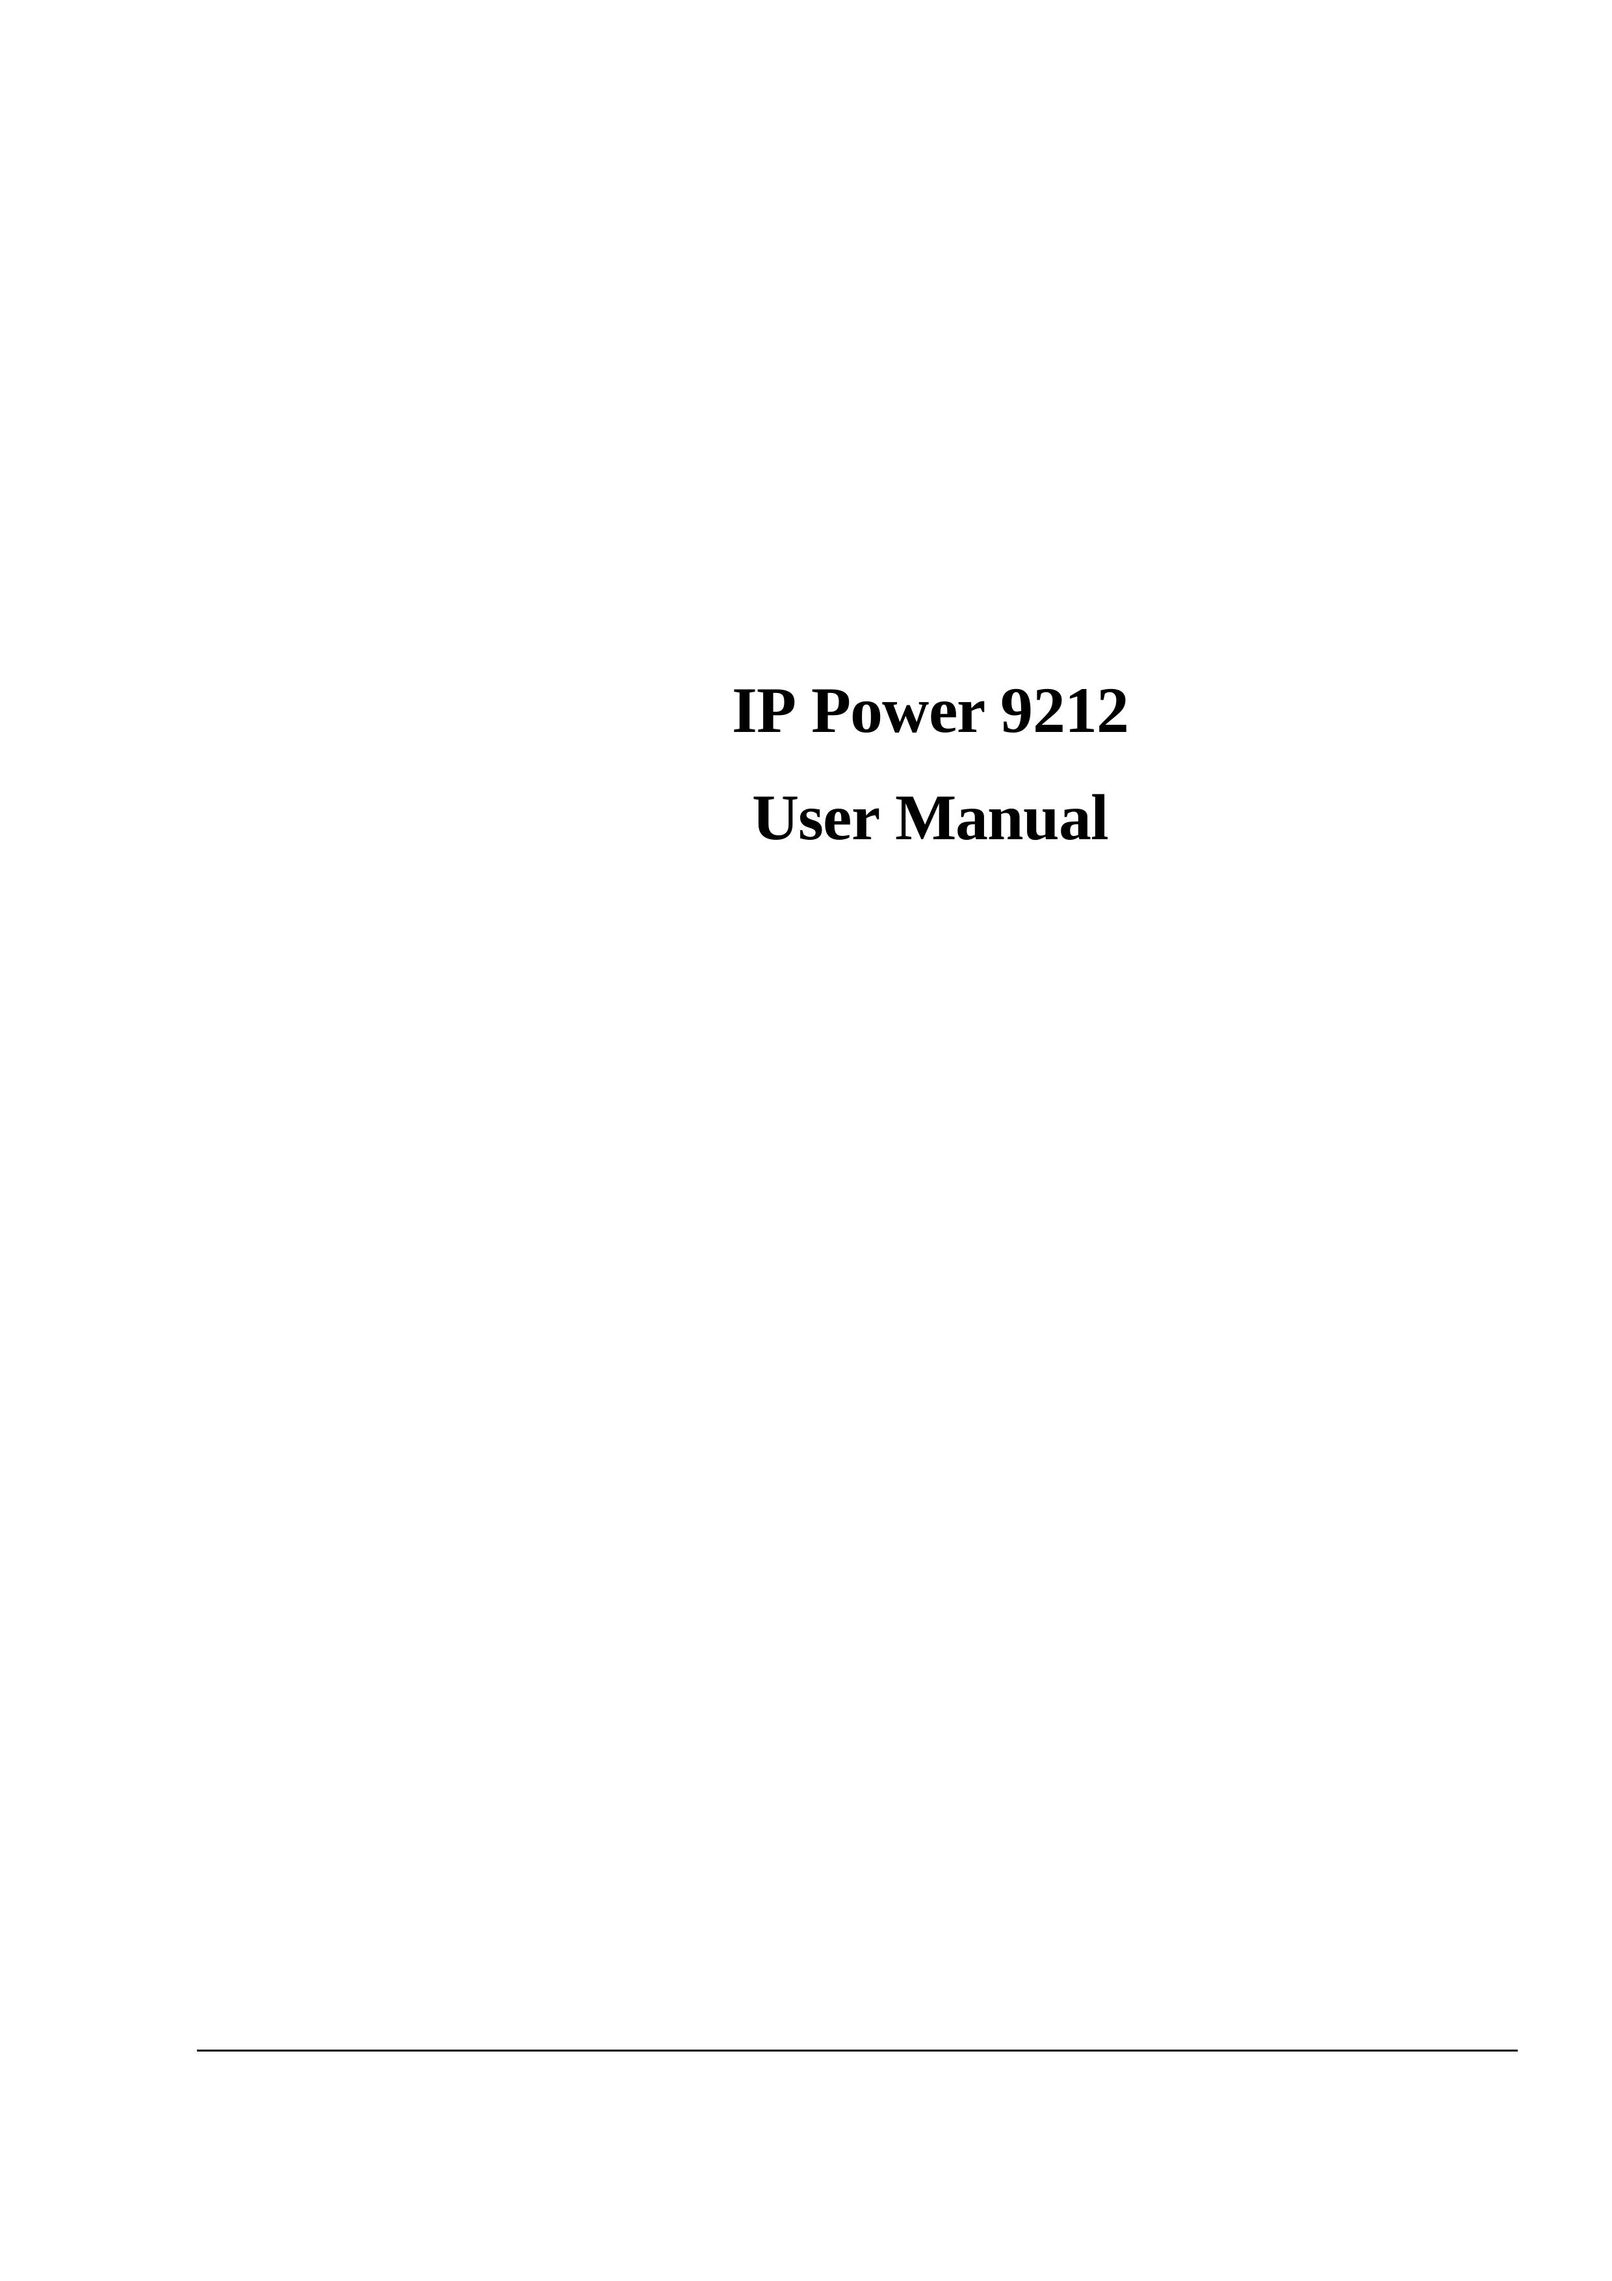 New Media Technology 9212 Network Card User Manual